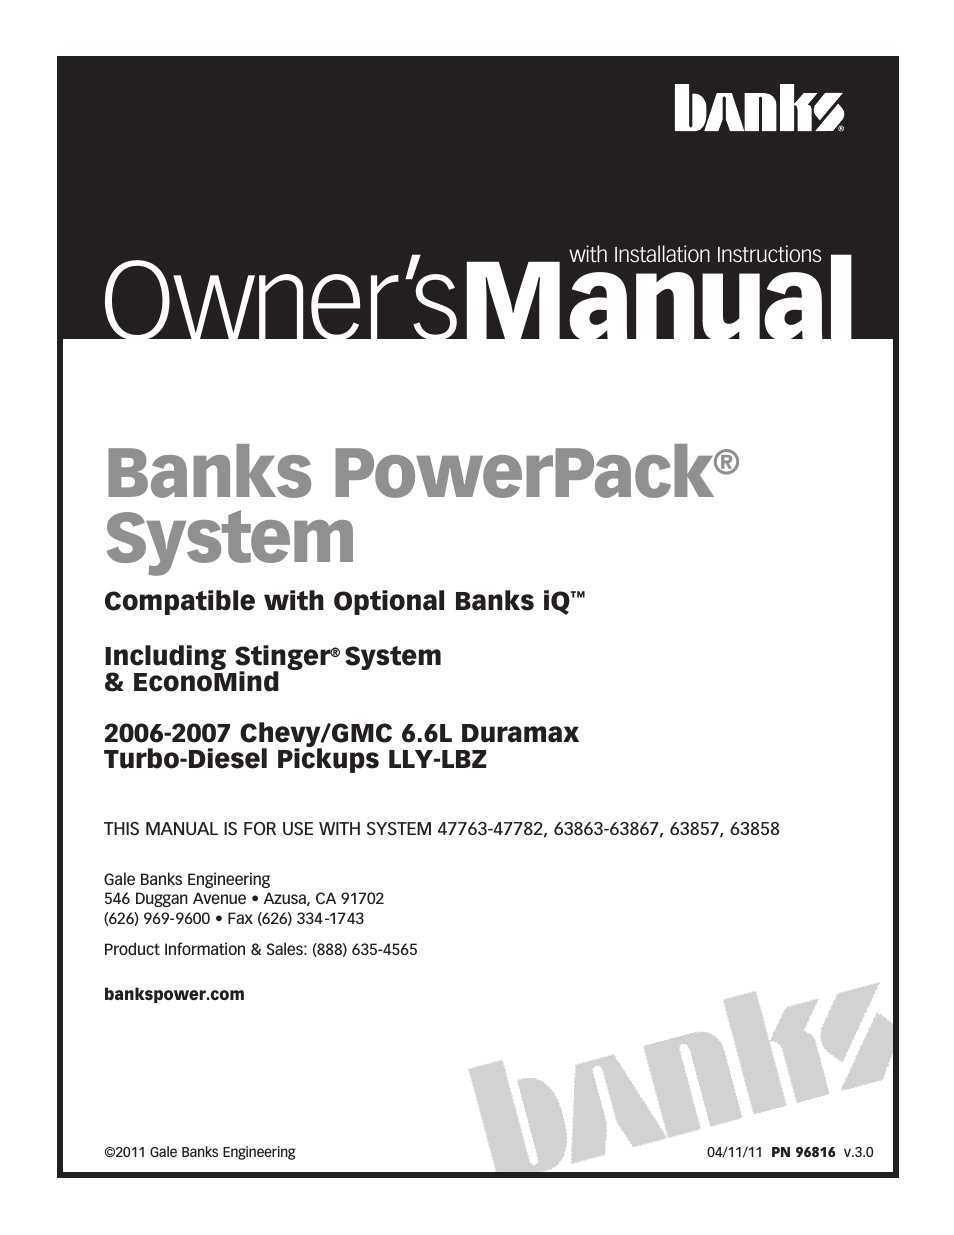 Chevy_GMC Trucks: Duramax LLY-LBZ (Diesel ’06 - 07 6.6L) Power Systems- PowerPack & Stinger Systems w EconoMind (LLY & LBZ) '06-07 (iQ) Compatible with Optional Banks iQ